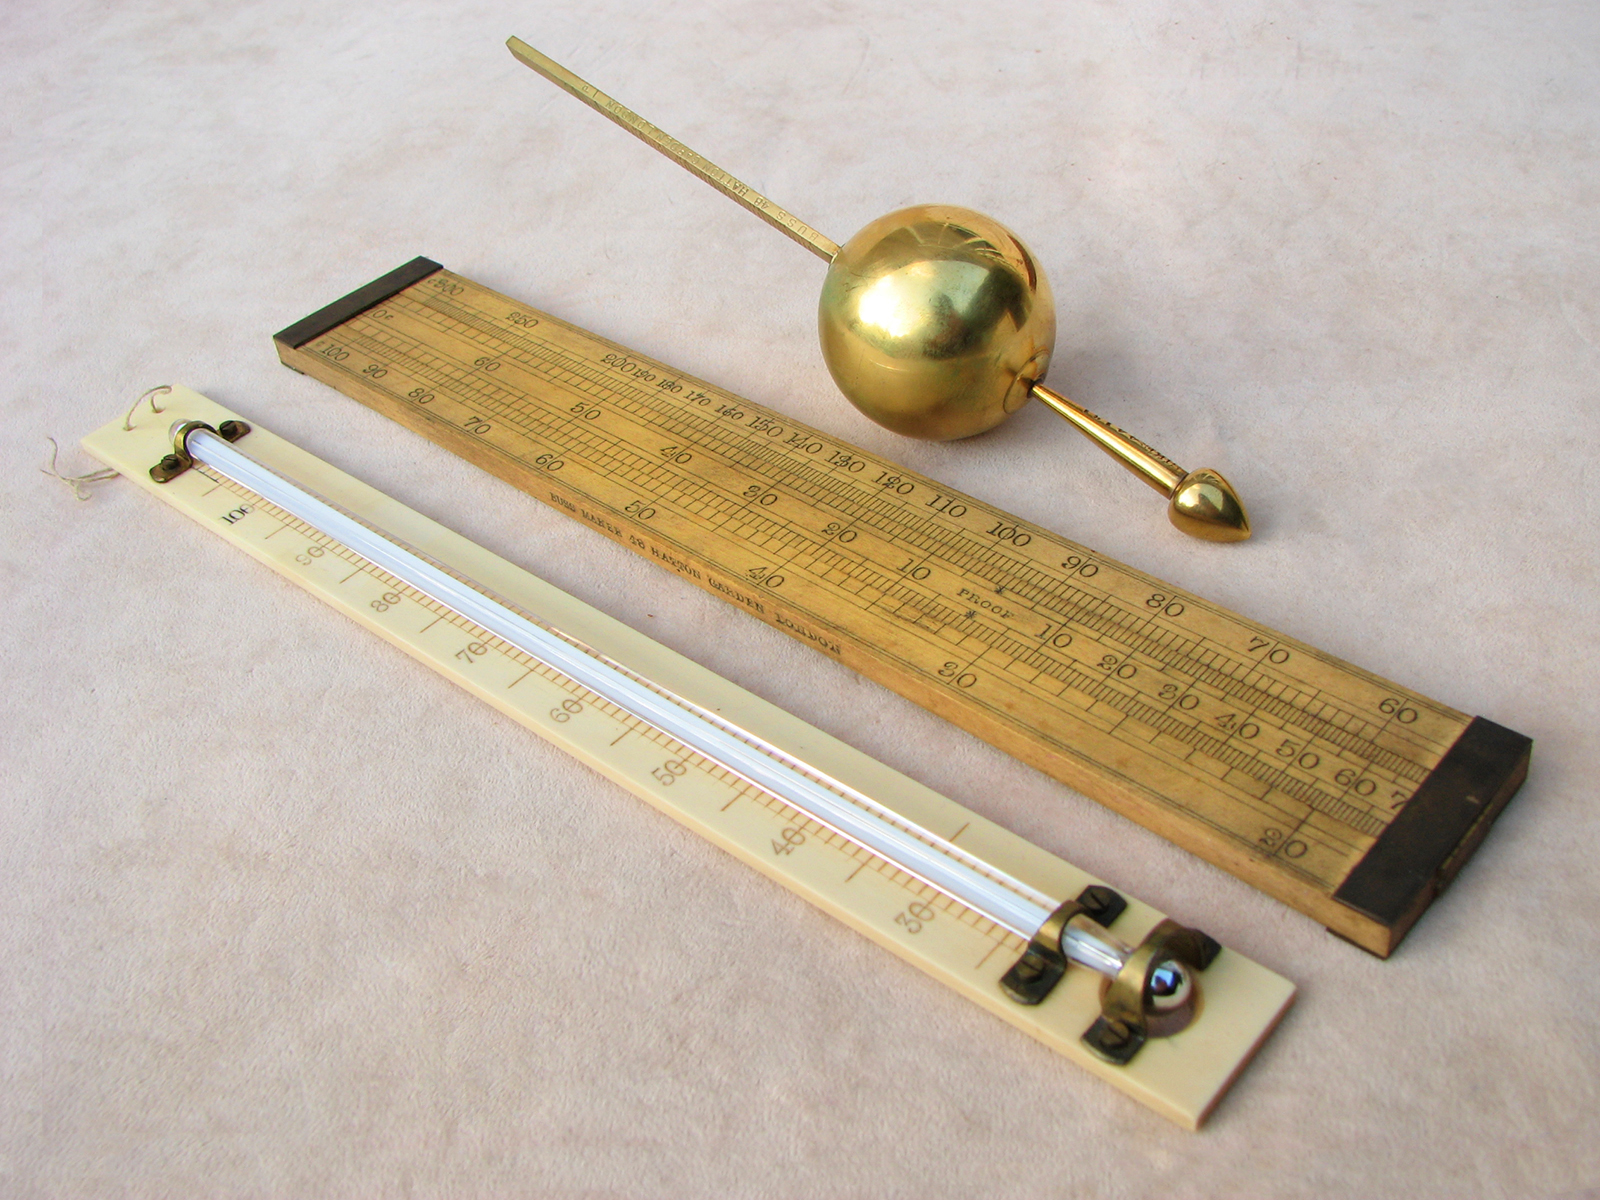 19th century Sikes hydrometer set by T O Buss with book of spirit tables